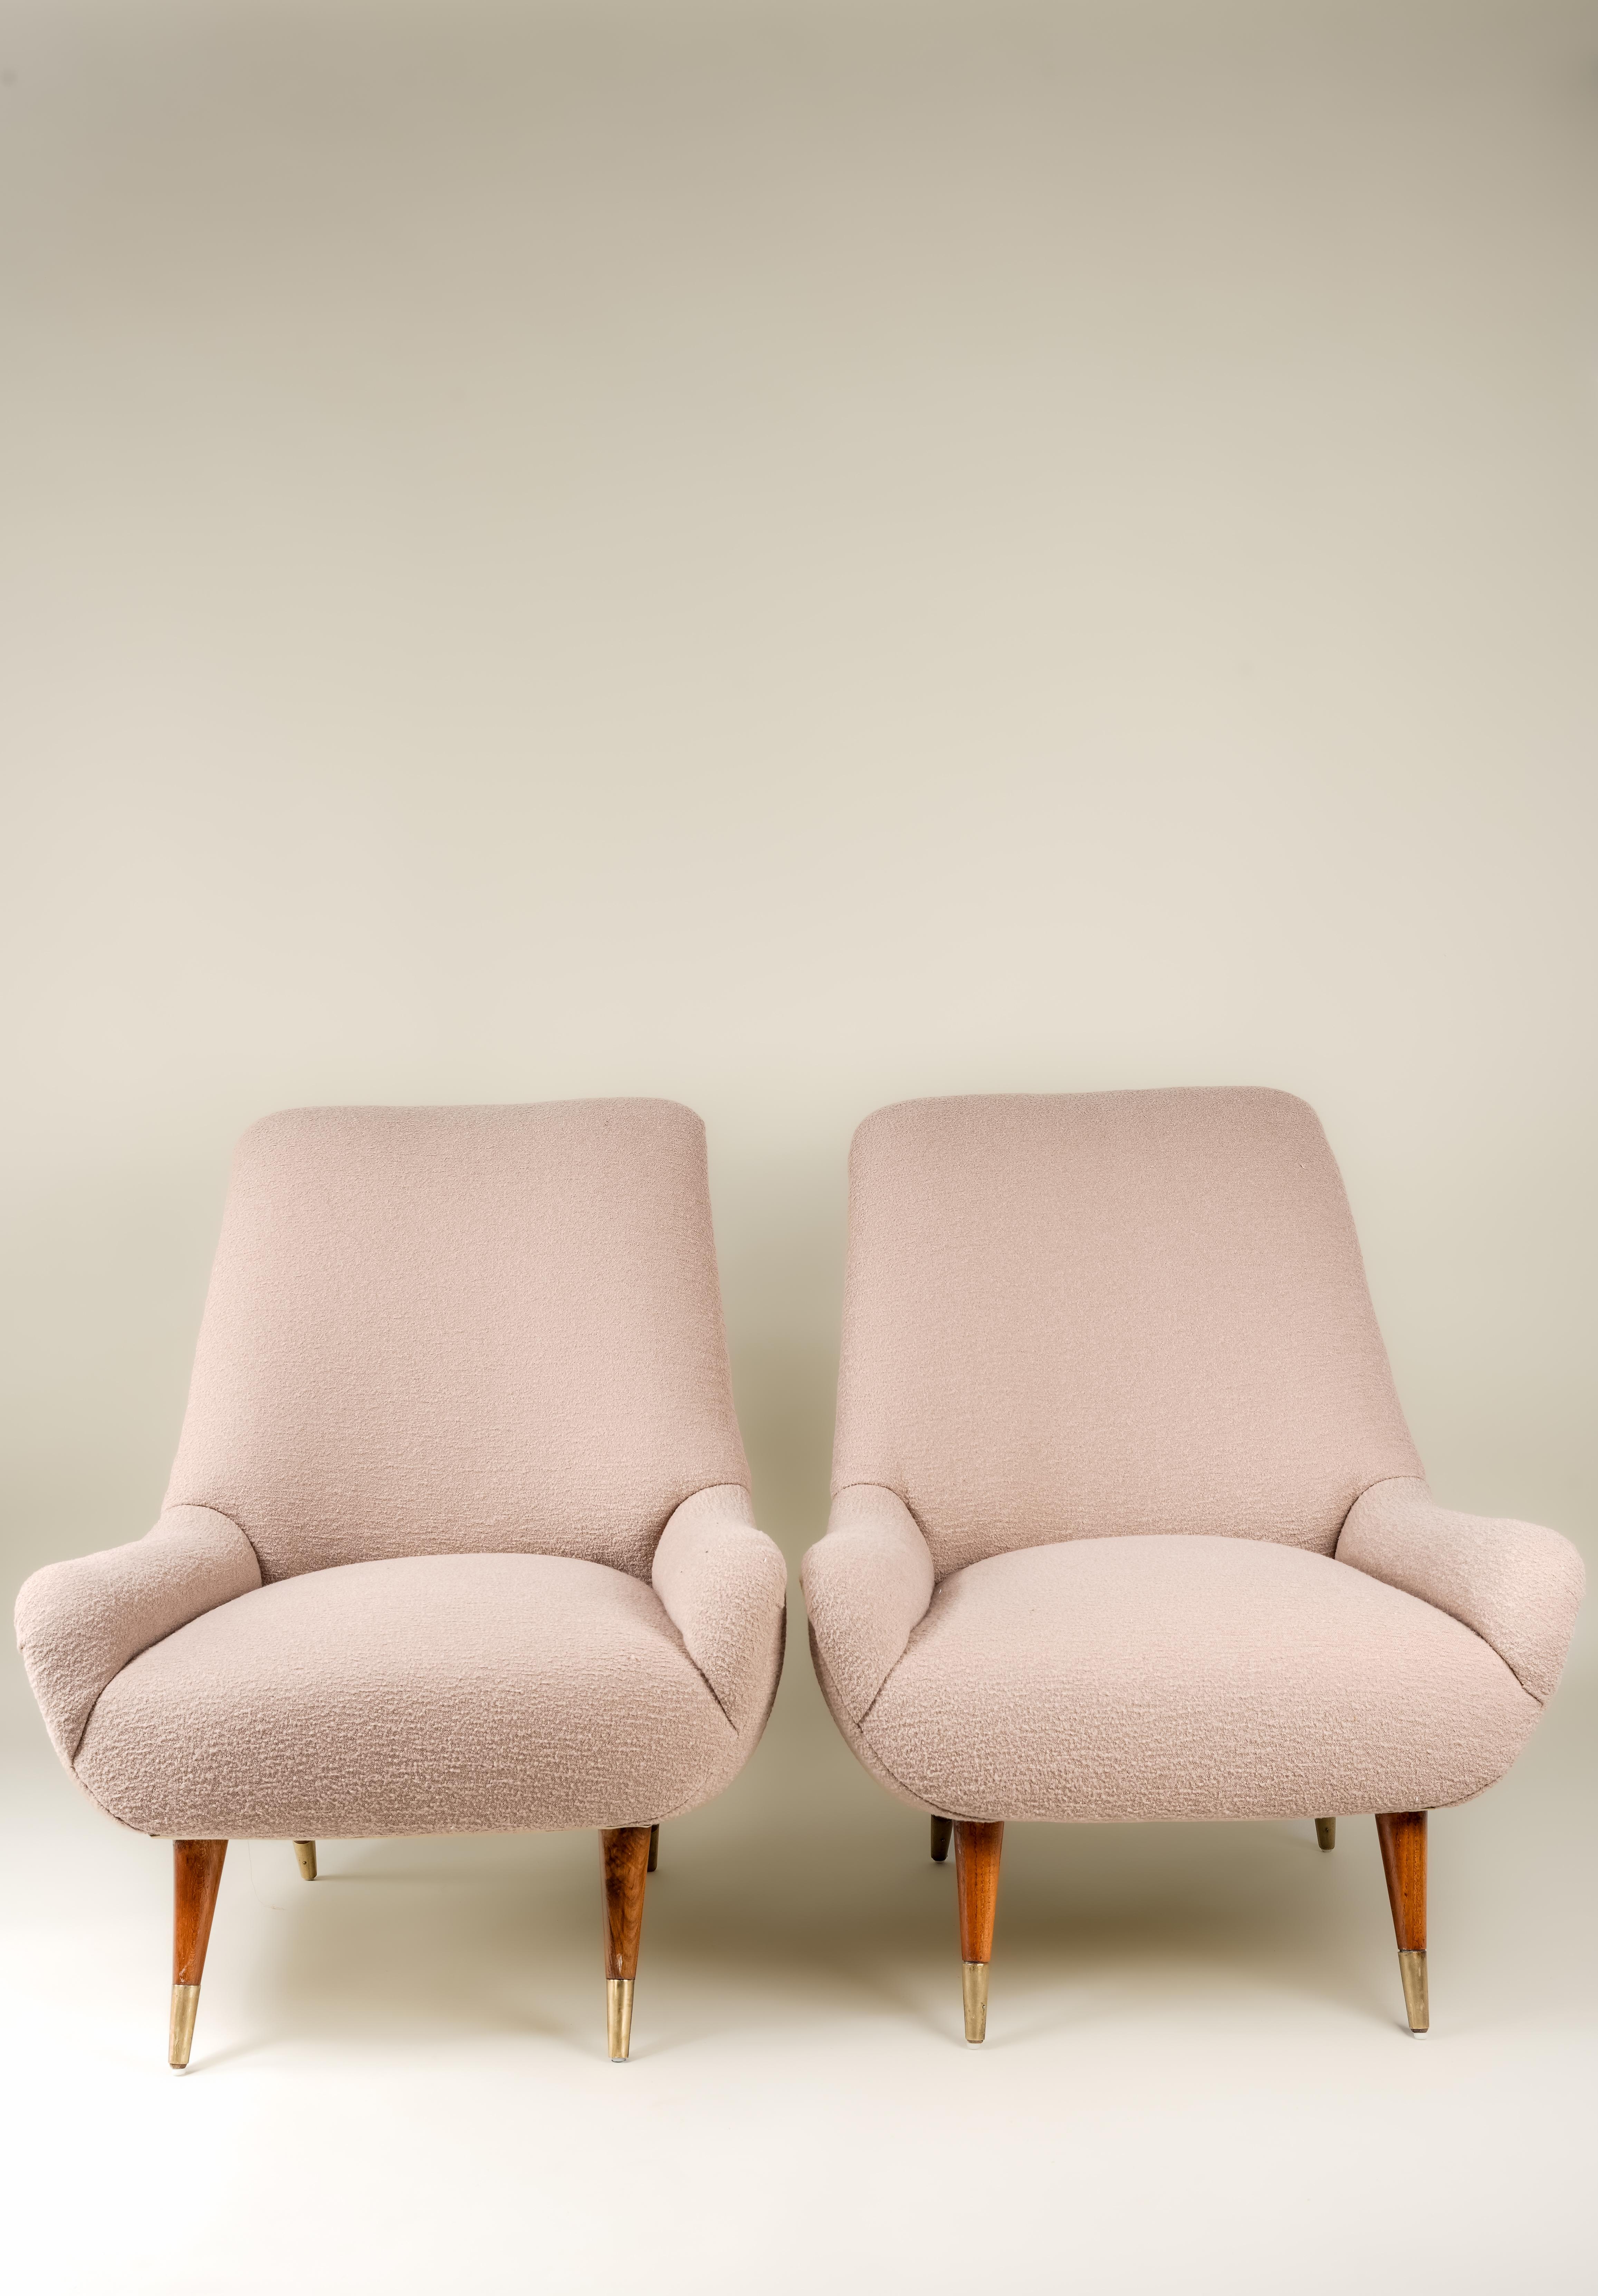 This pair of midcentury Italian lounge chairs features new cashmere boucle upholstery in a buff cream color. The sleek, streamlined chairs feature tapered wooden legs with brass slipper cups. Vintage condition with new upholstery. Wear consistent